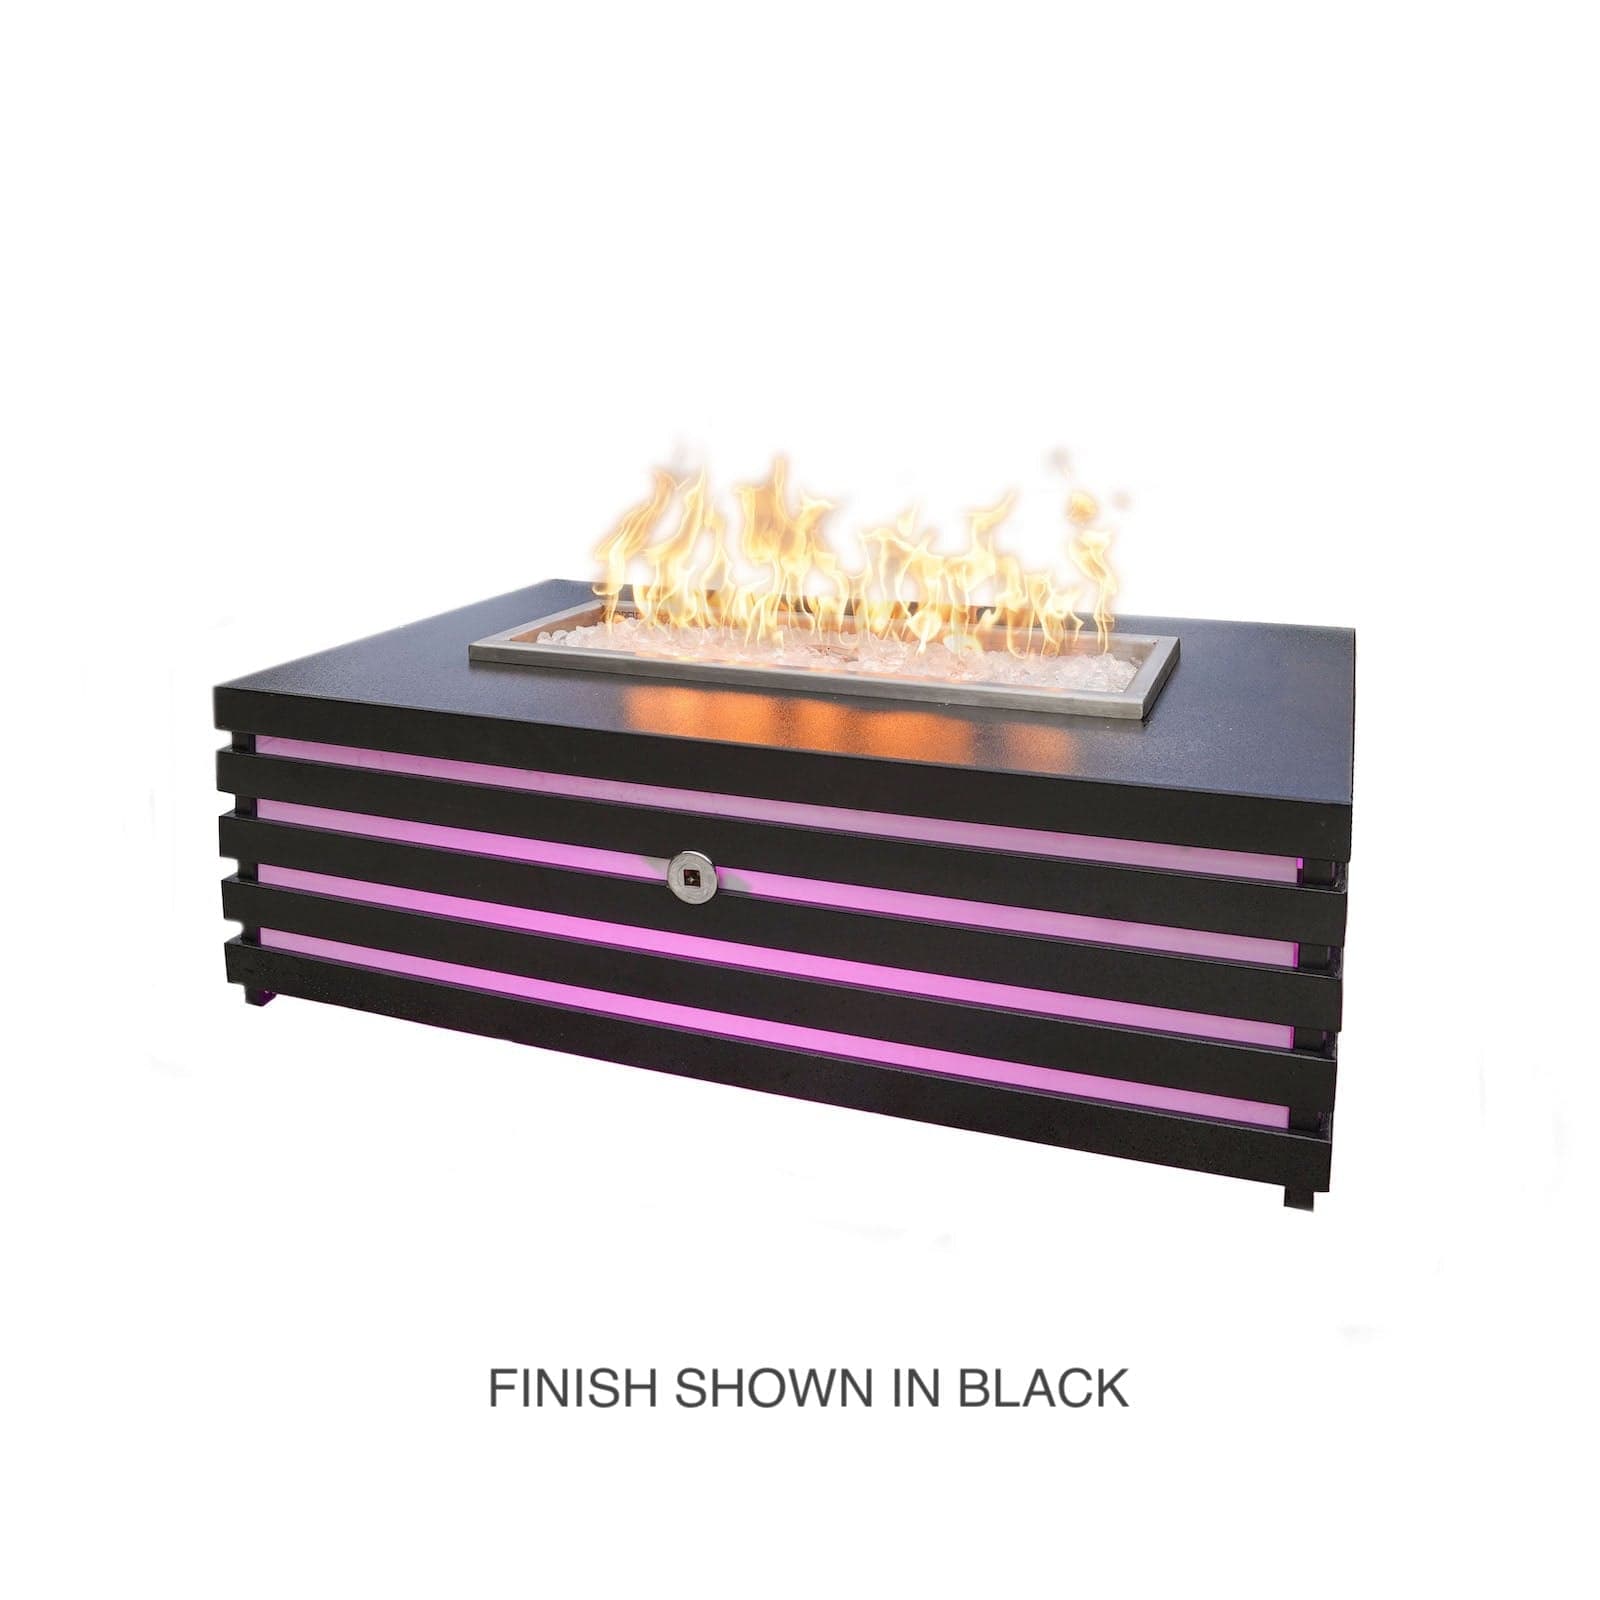 The Outdoor Plus Fire Features The Outdoor Plus 72" Amina Powder Coated Fire Pit / OPT-AMI7224, OPT-AMI7224FSML, OPT-AMI7224FSEN, OPT-AMI7224E12V, OPT-AMI7224EKIT